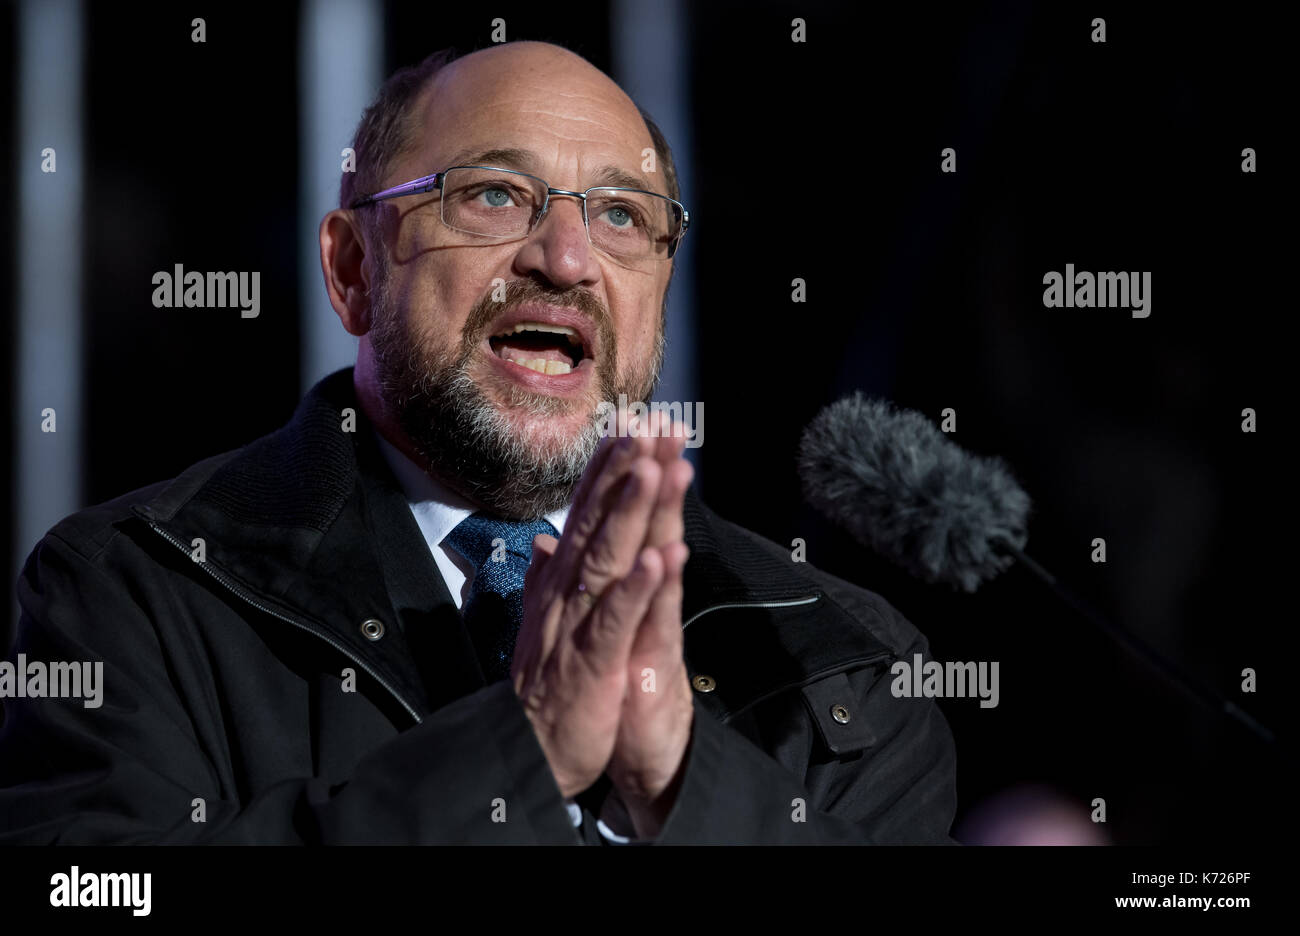 dpatop - Martin Schulz from the Social Democratic Party of Germany (SPD) and candidate for the German chancellorship, speaking at an election campaign event in Munich, Germany, 14 September 2017. Photo: Sven Hoppe/dpa Stock Photo